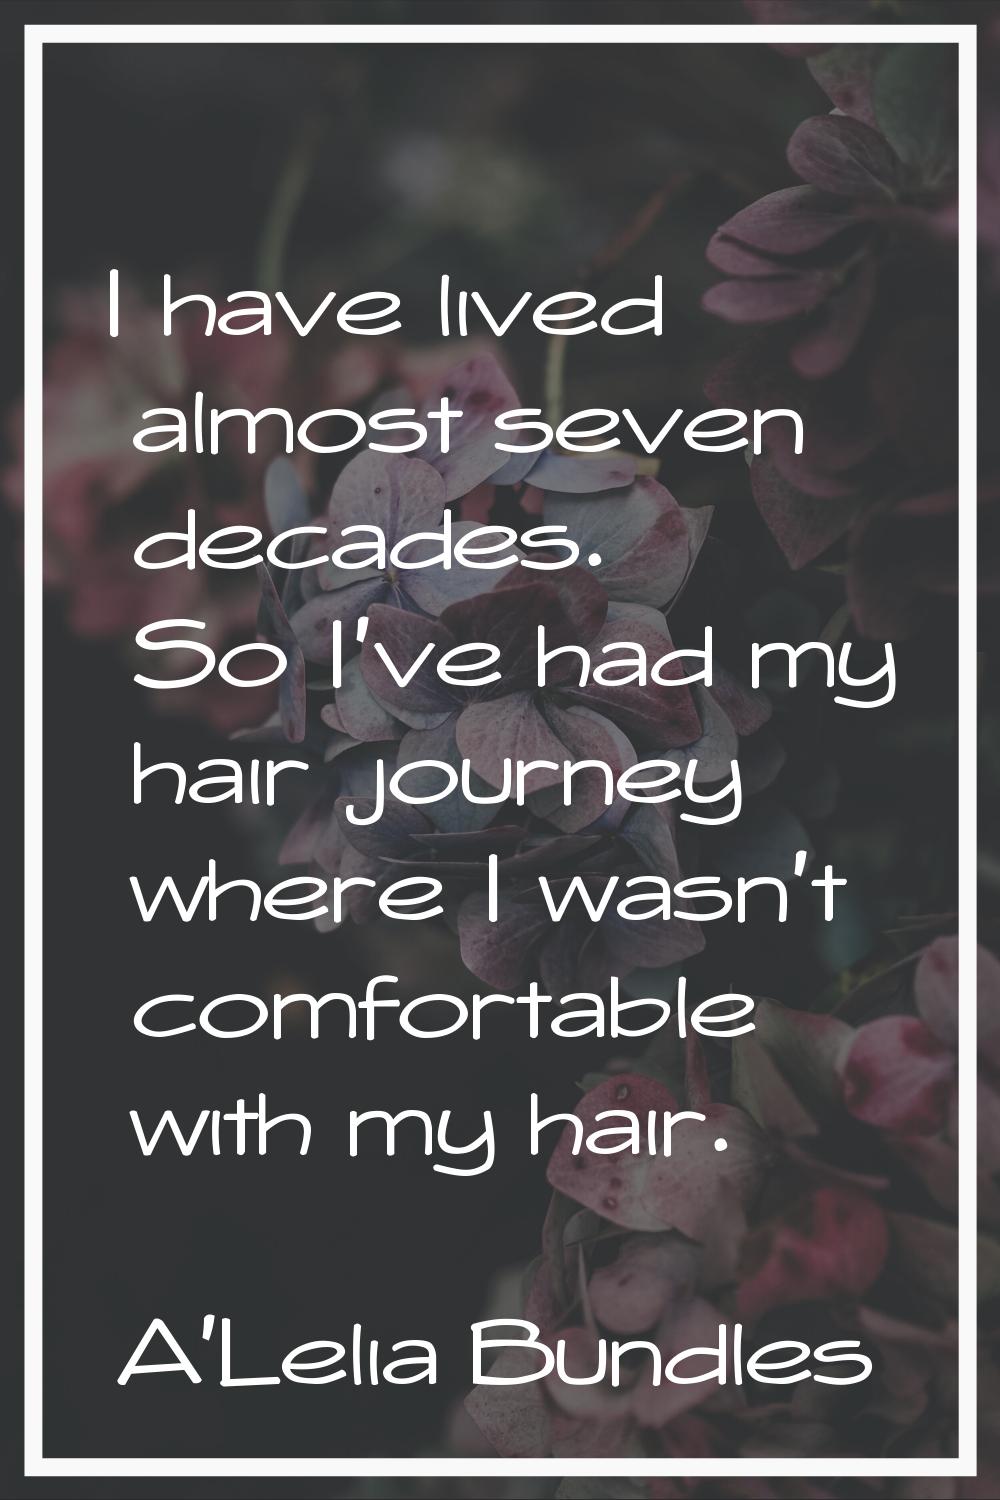 I have lived almost seven decades. So I've had my hair journey where I wasn't comfortable with my h